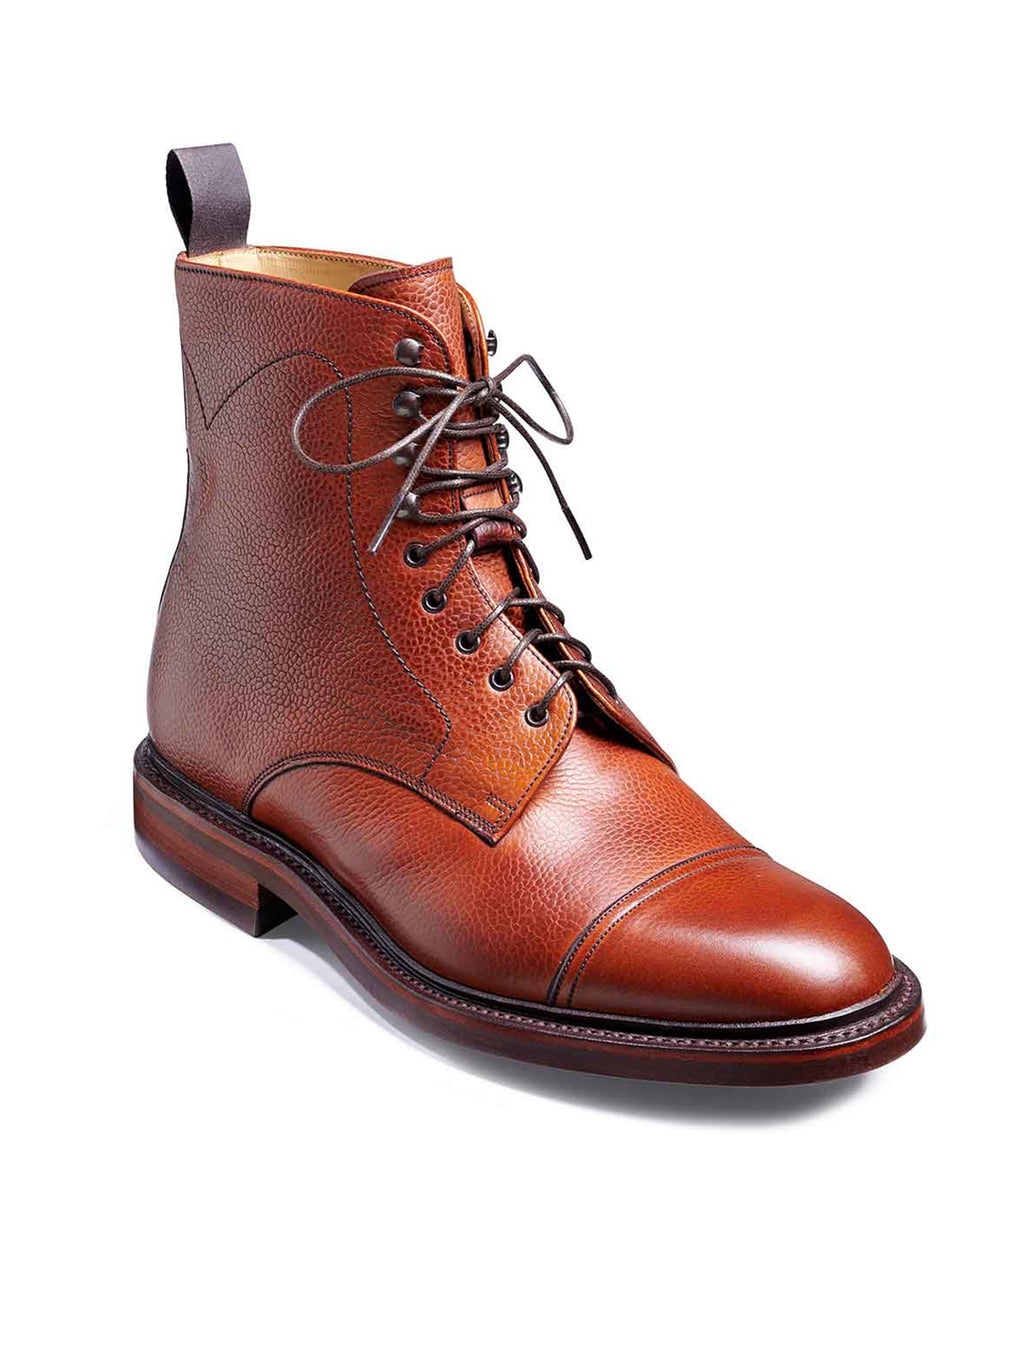 barker donegal rosewood boots